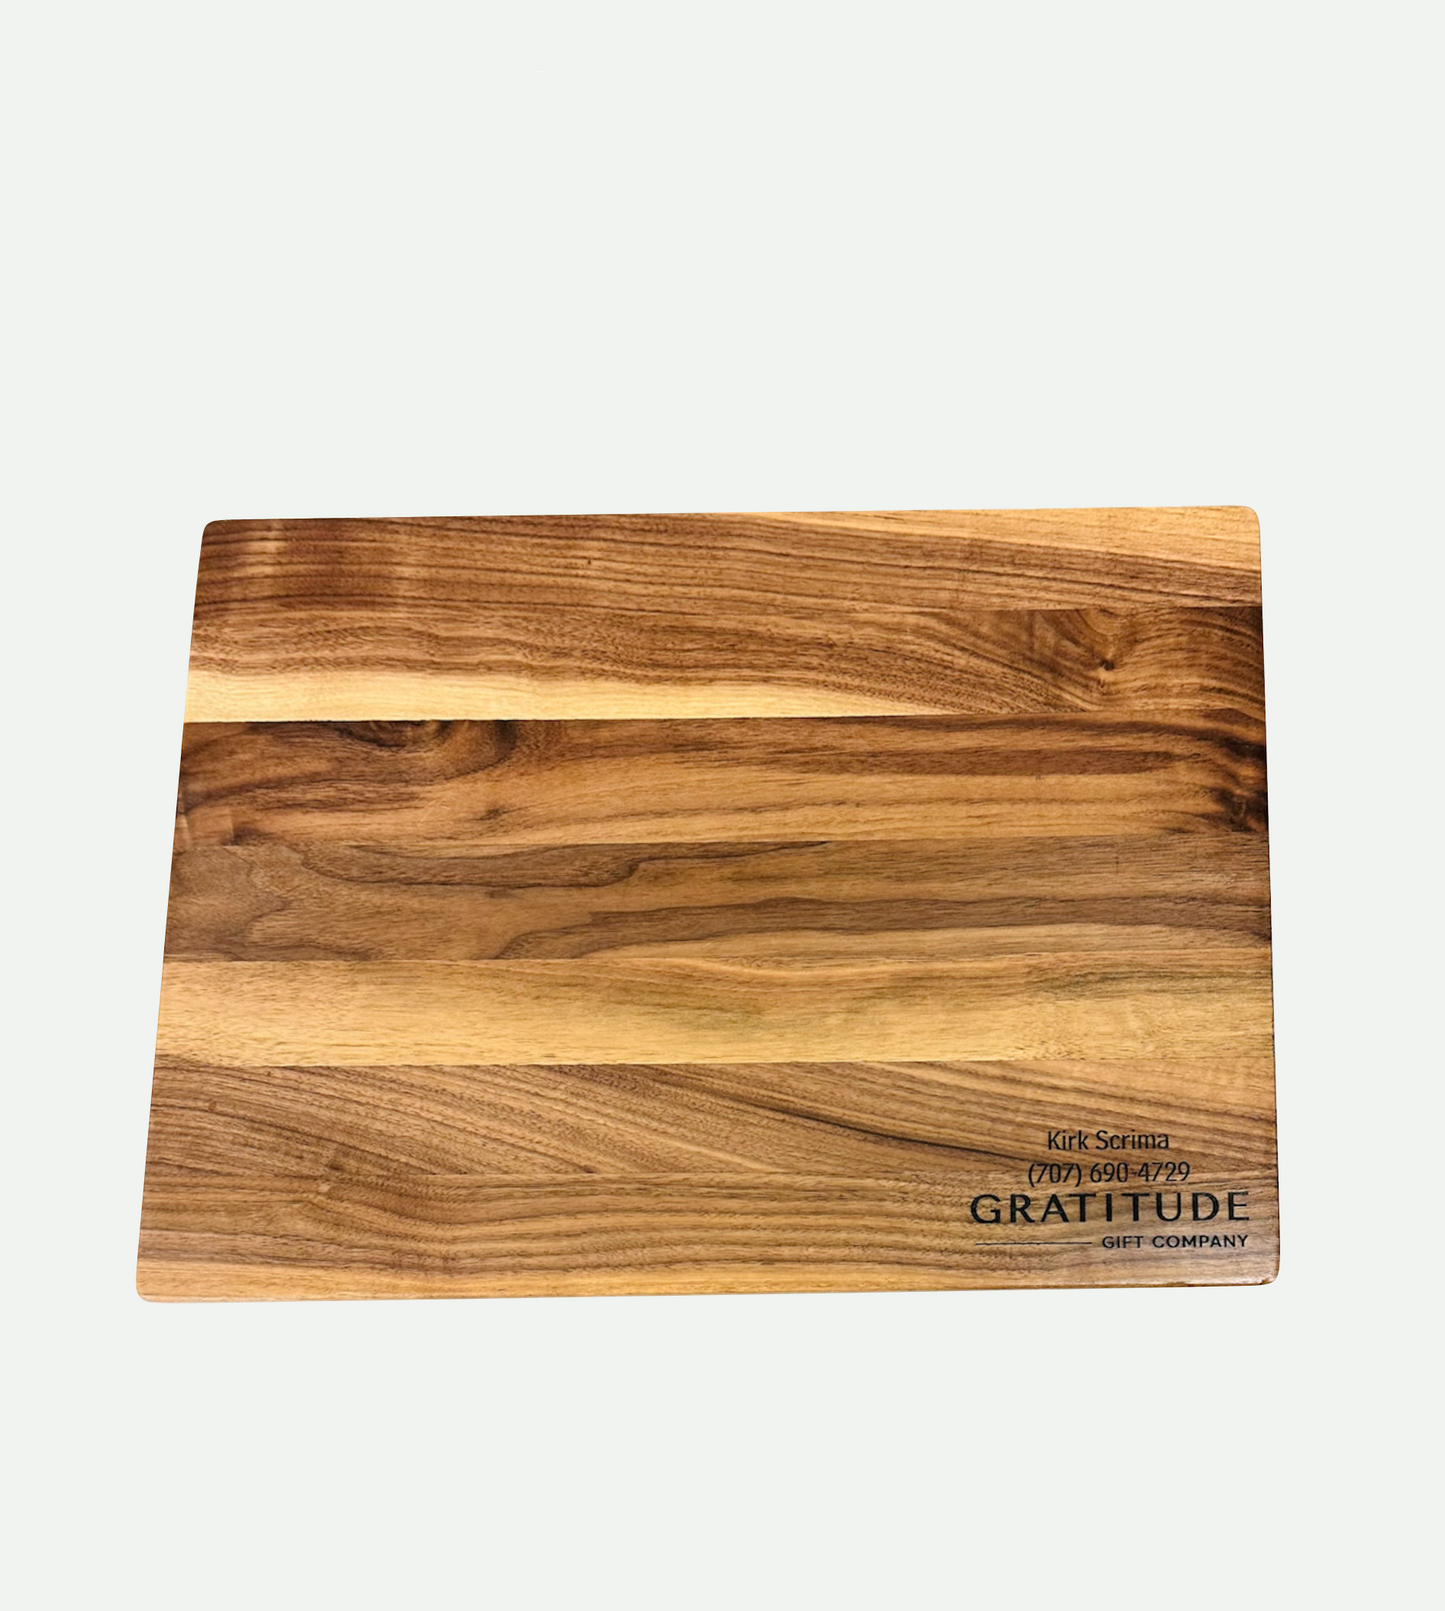 Custom Engraved and Branded Cutting Boards